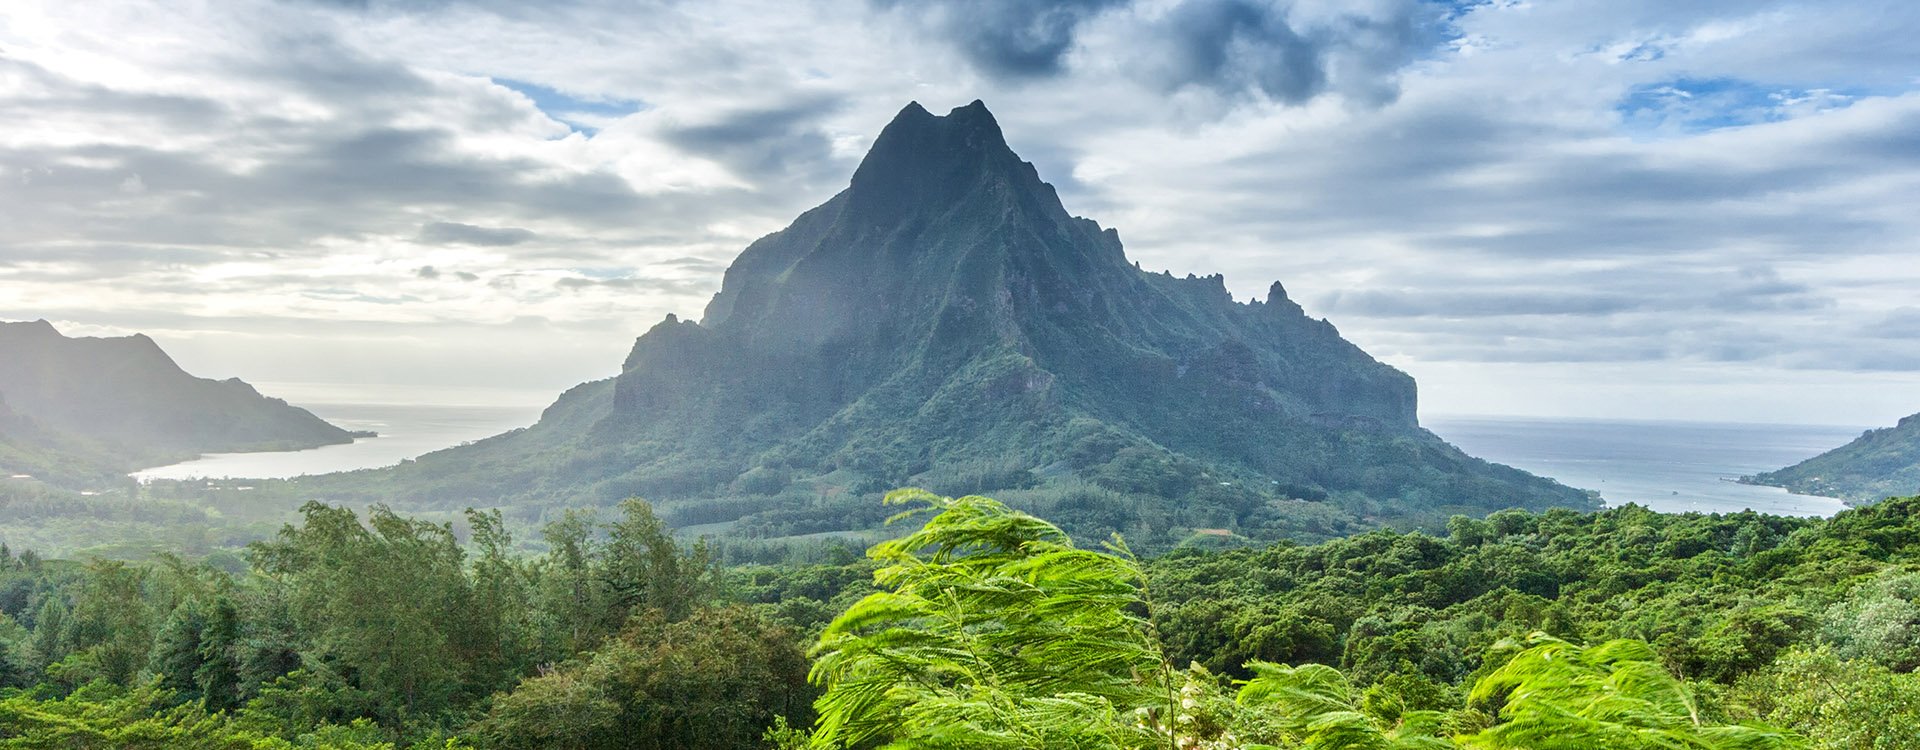 Amazing landscape of Tahiti, Polynesia. Mountains, forest and ocean